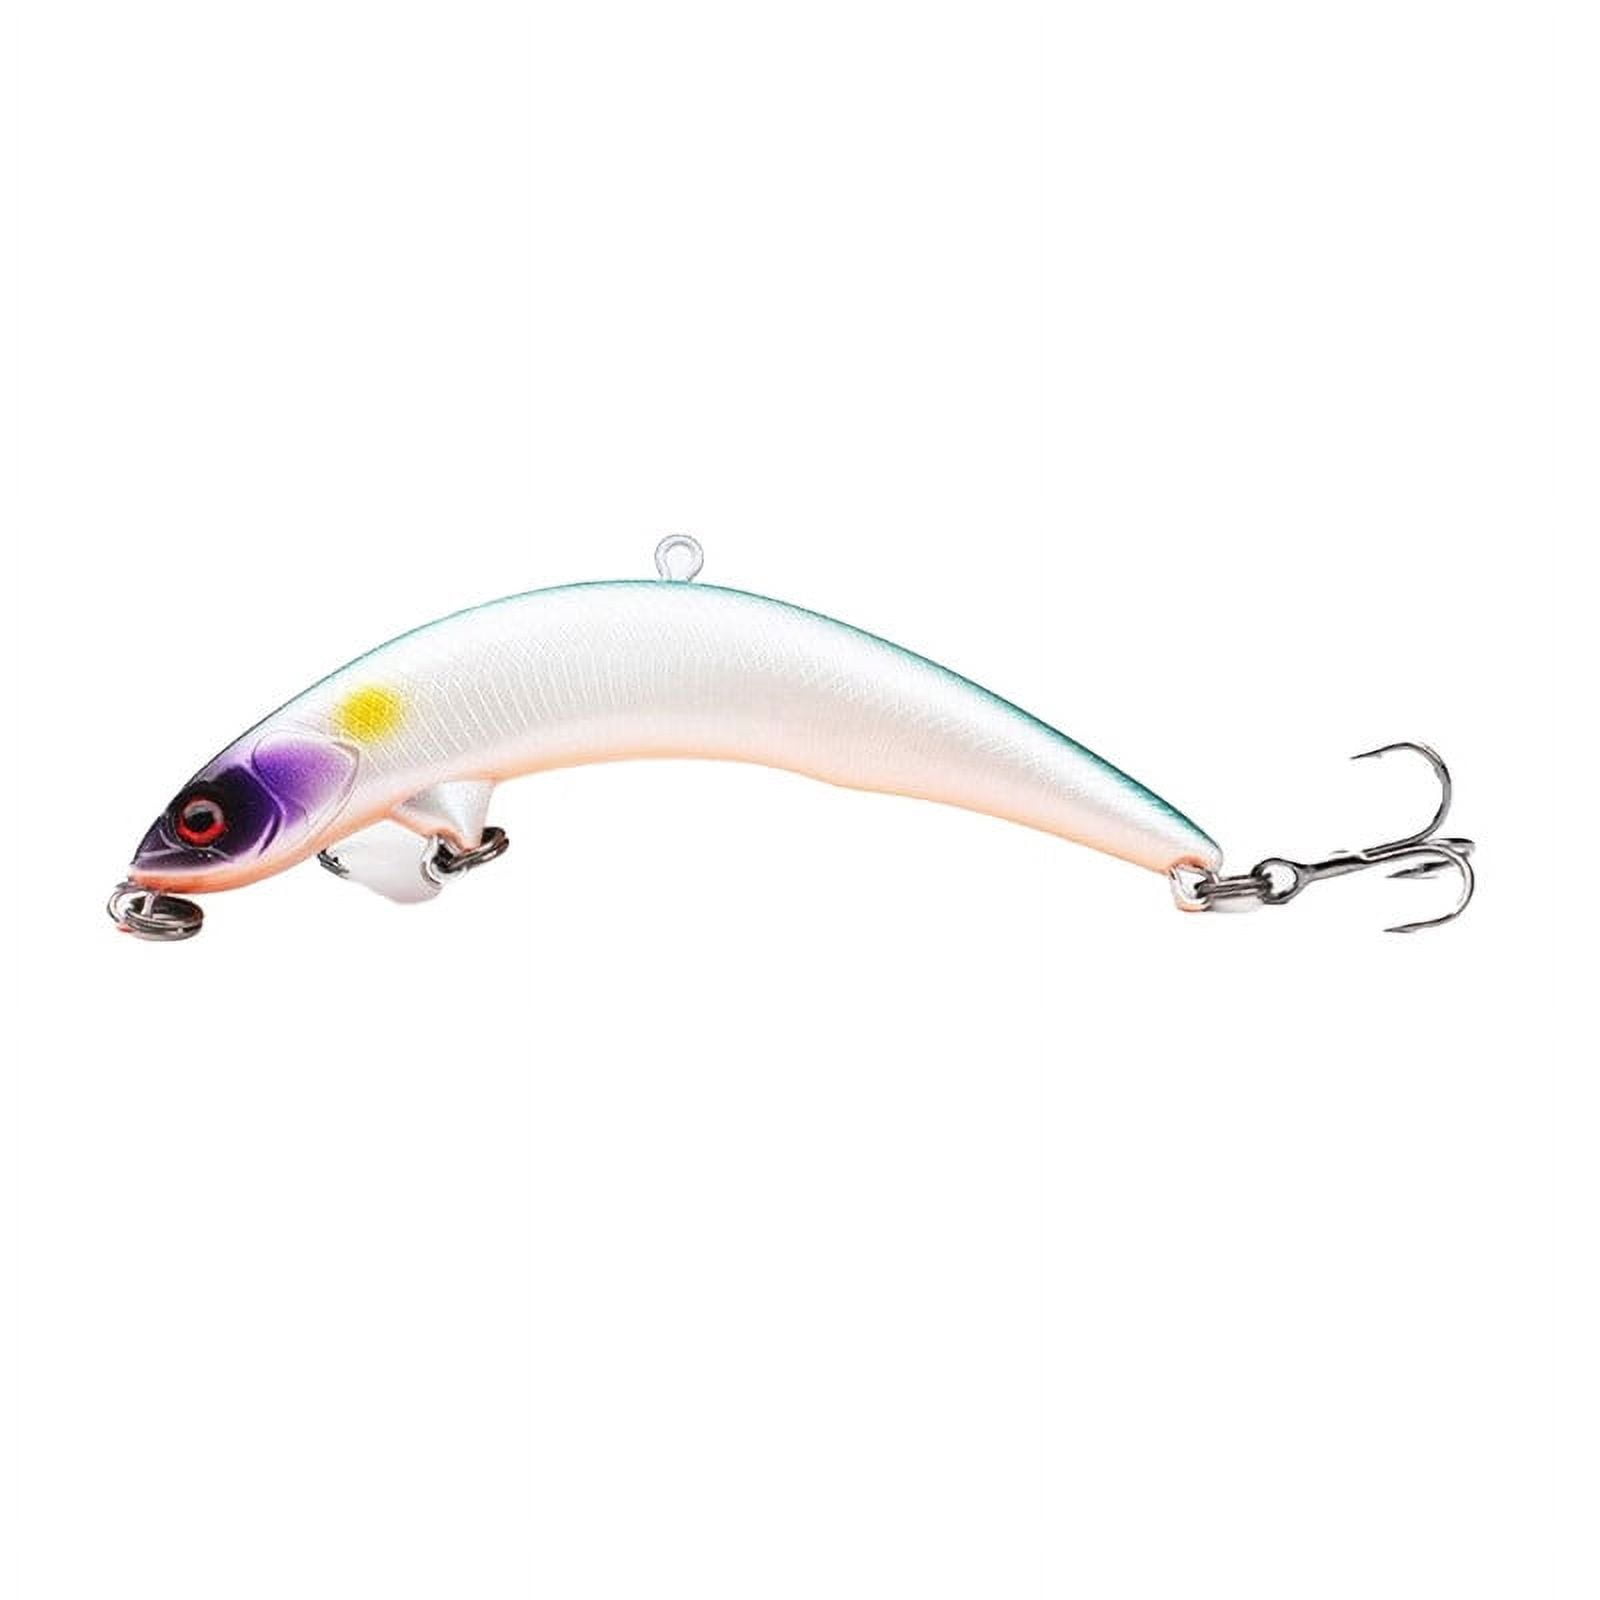 VERMON Lure Bait,Fishing Bait 3D Simulated Eyes Low Wind